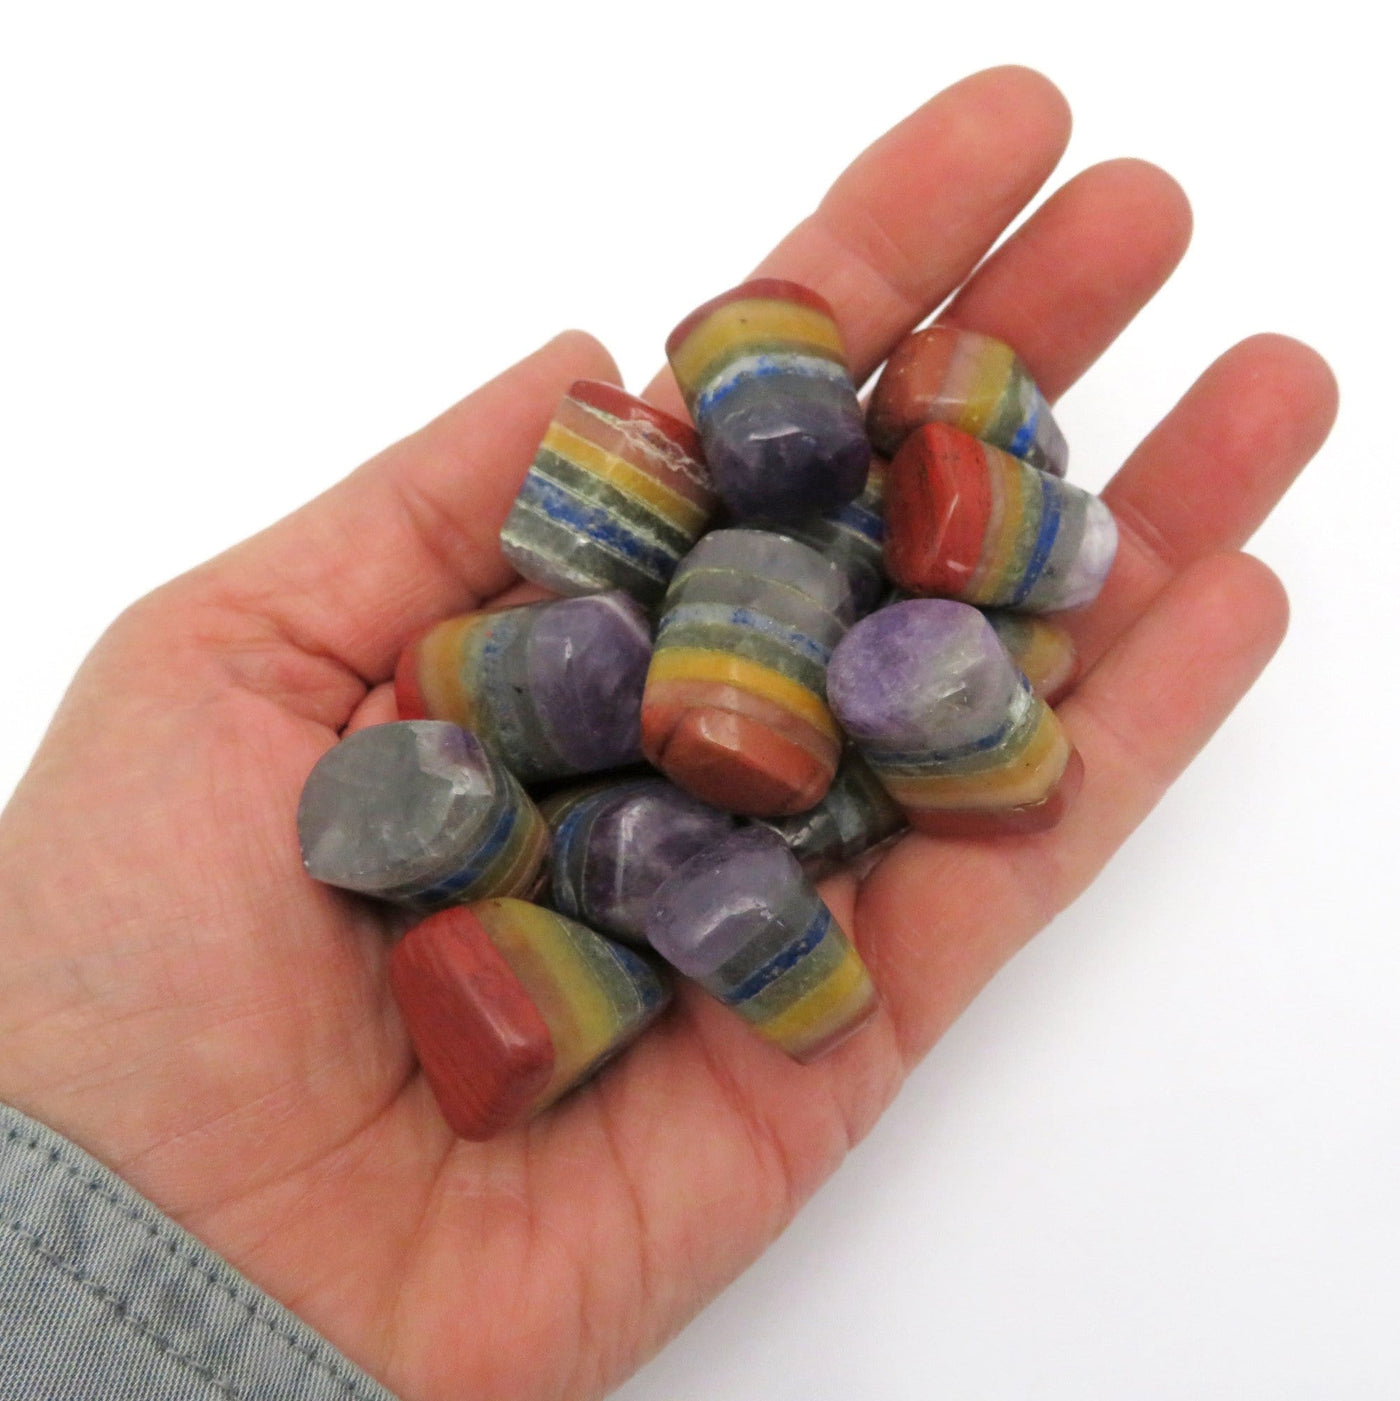 Bonded 7 chakra Stones  in a pile in a hand